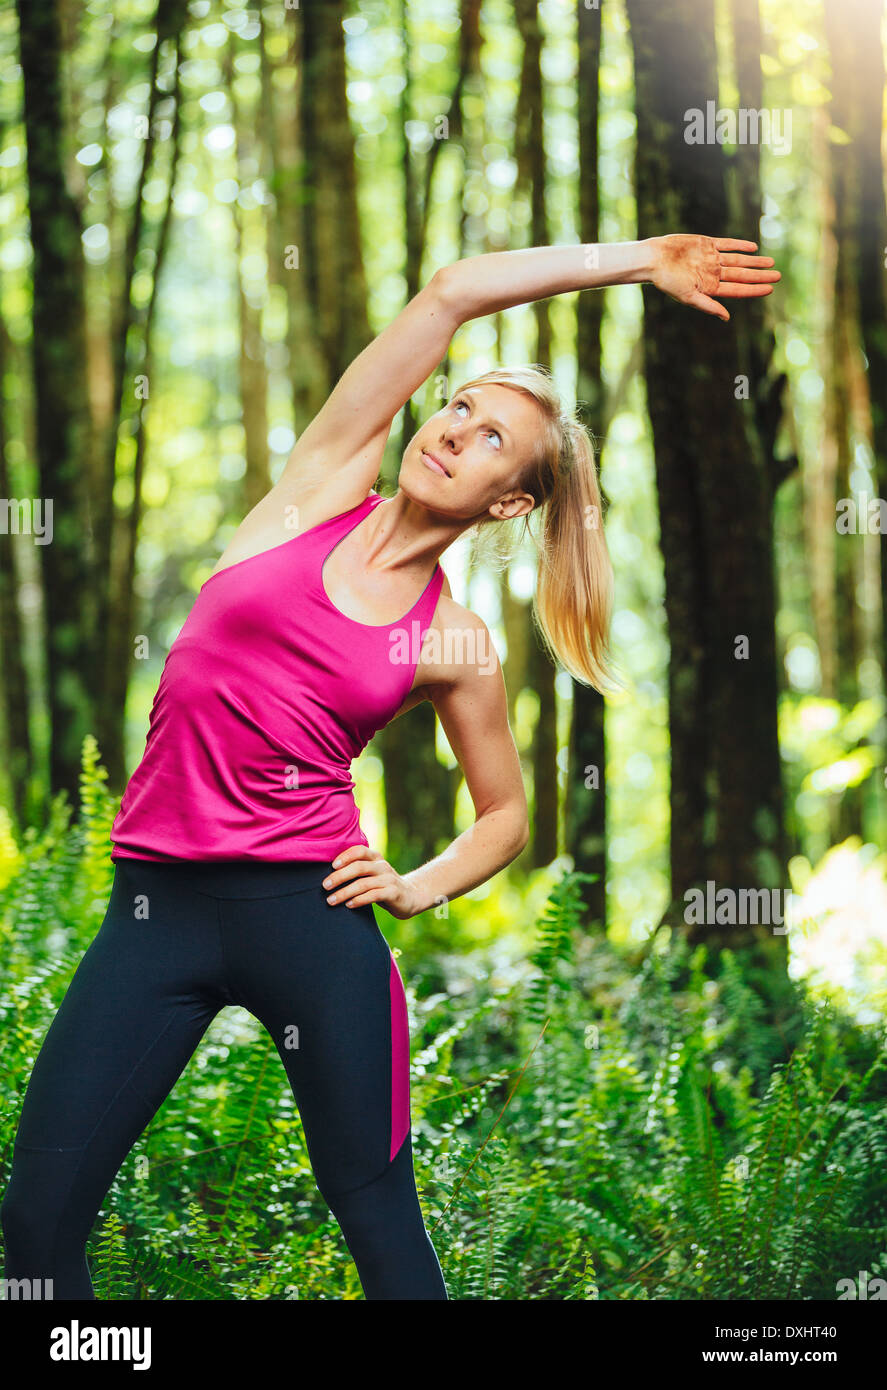 Athletic Woman Stretching Before going for Run in the Forest. Active Healthy Lifestyle Concept. Stock Photo